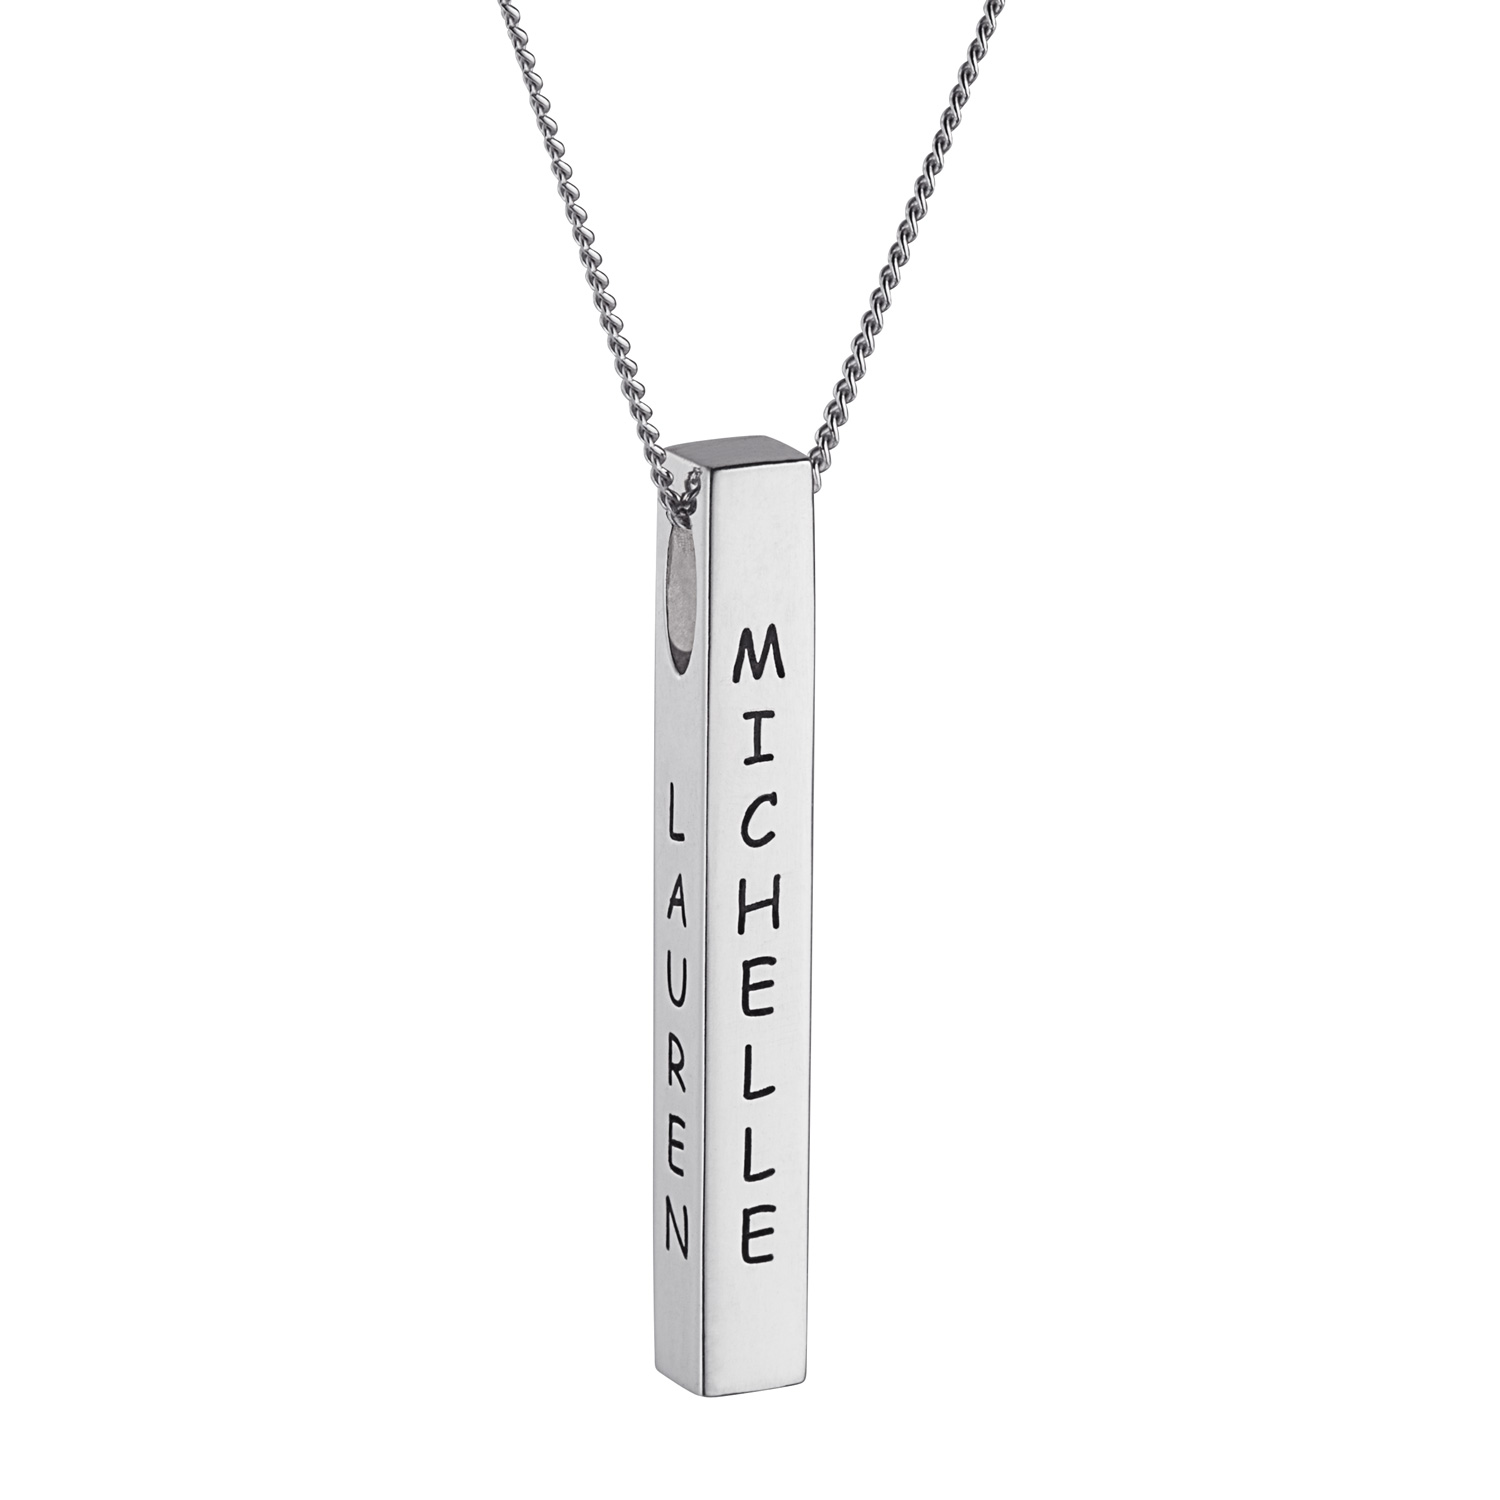 chain 18 inch Sterling Silver Personalized 4 Sided Vertical Bar Necklace Custom Made Any Name Pendant 